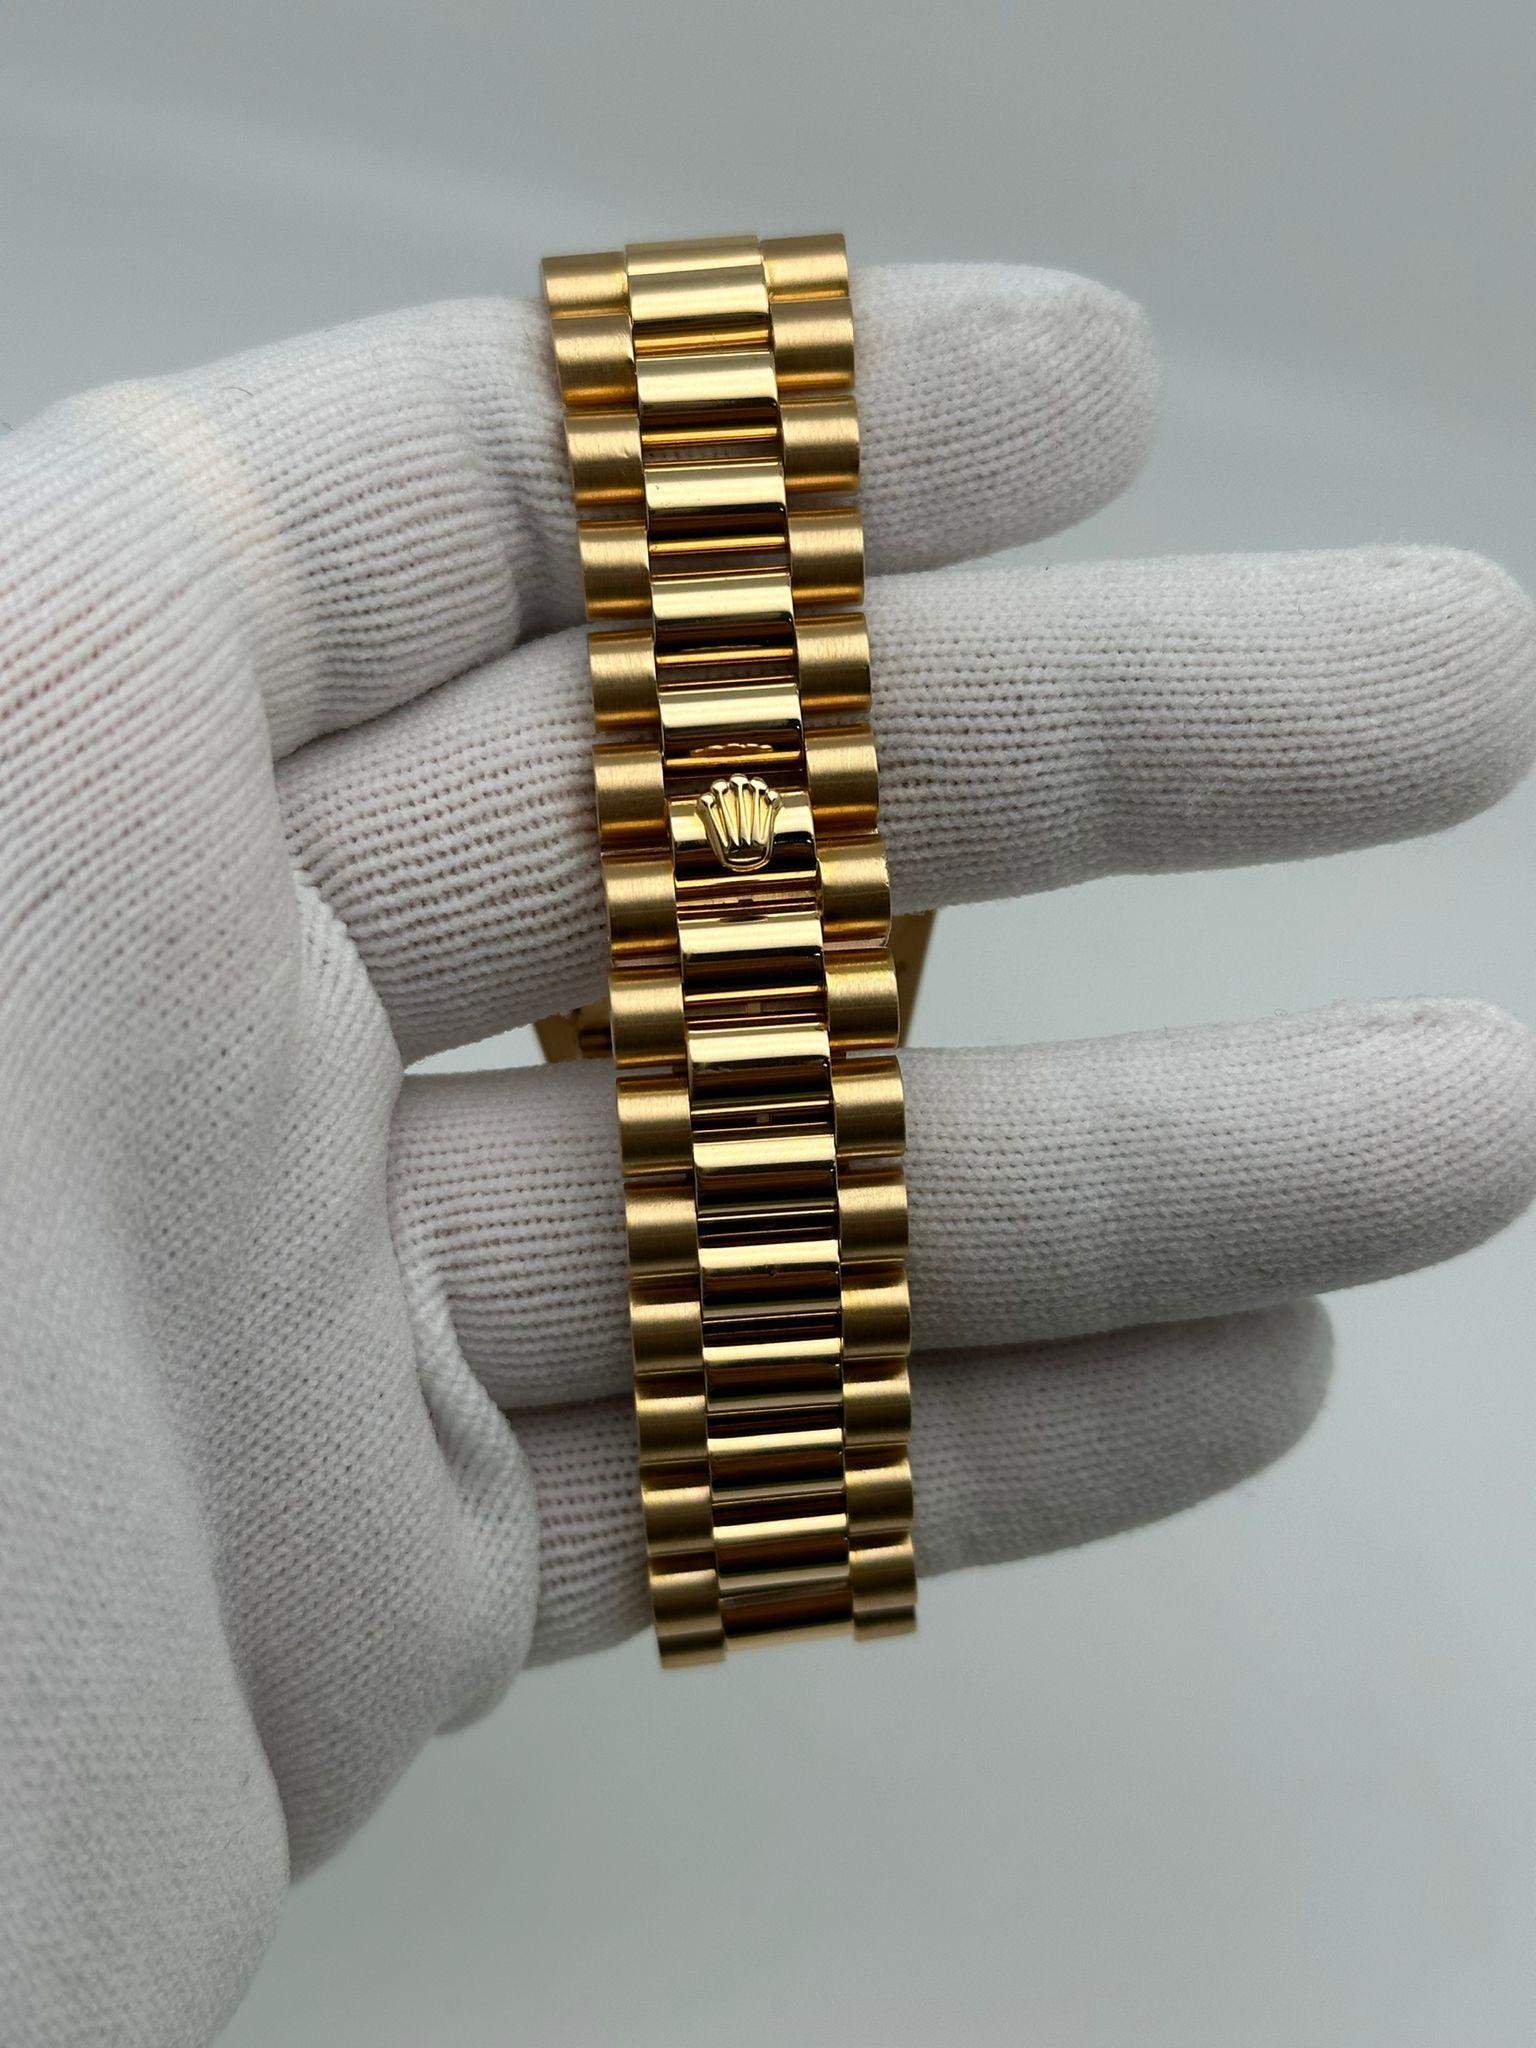 Rolex Day-Date 36mm 18k Yellow Gold Champagne Diamond Dial Automatic Watch 18038 For Sale 6